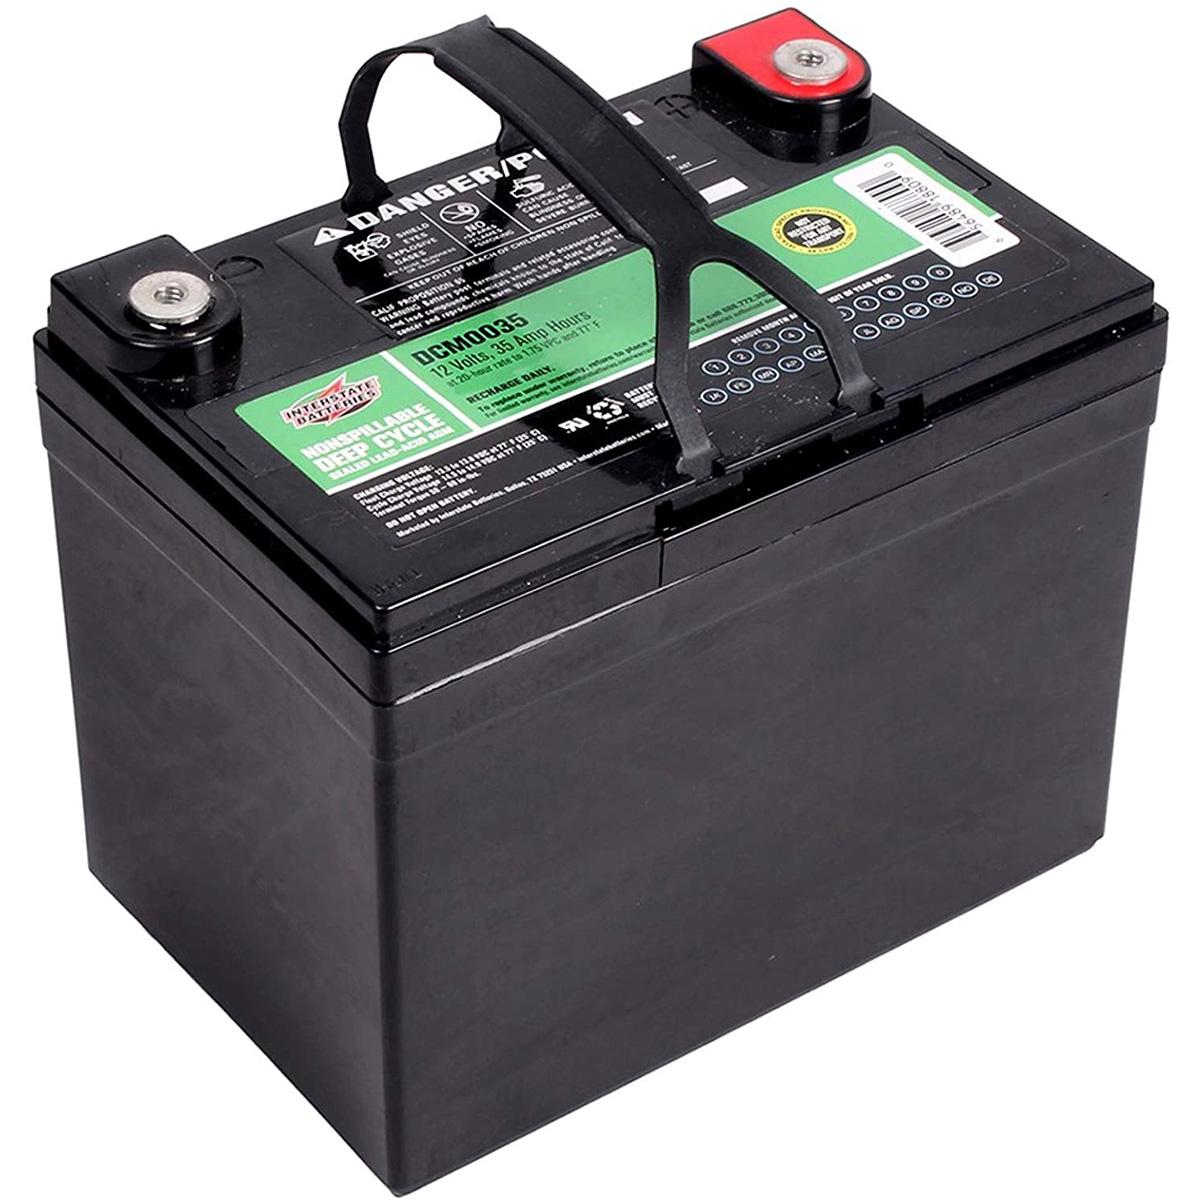 Interstate DCM0035 12V 35AH Lead Acid AGM Deep Cycle Battery for $67.49 Shipped